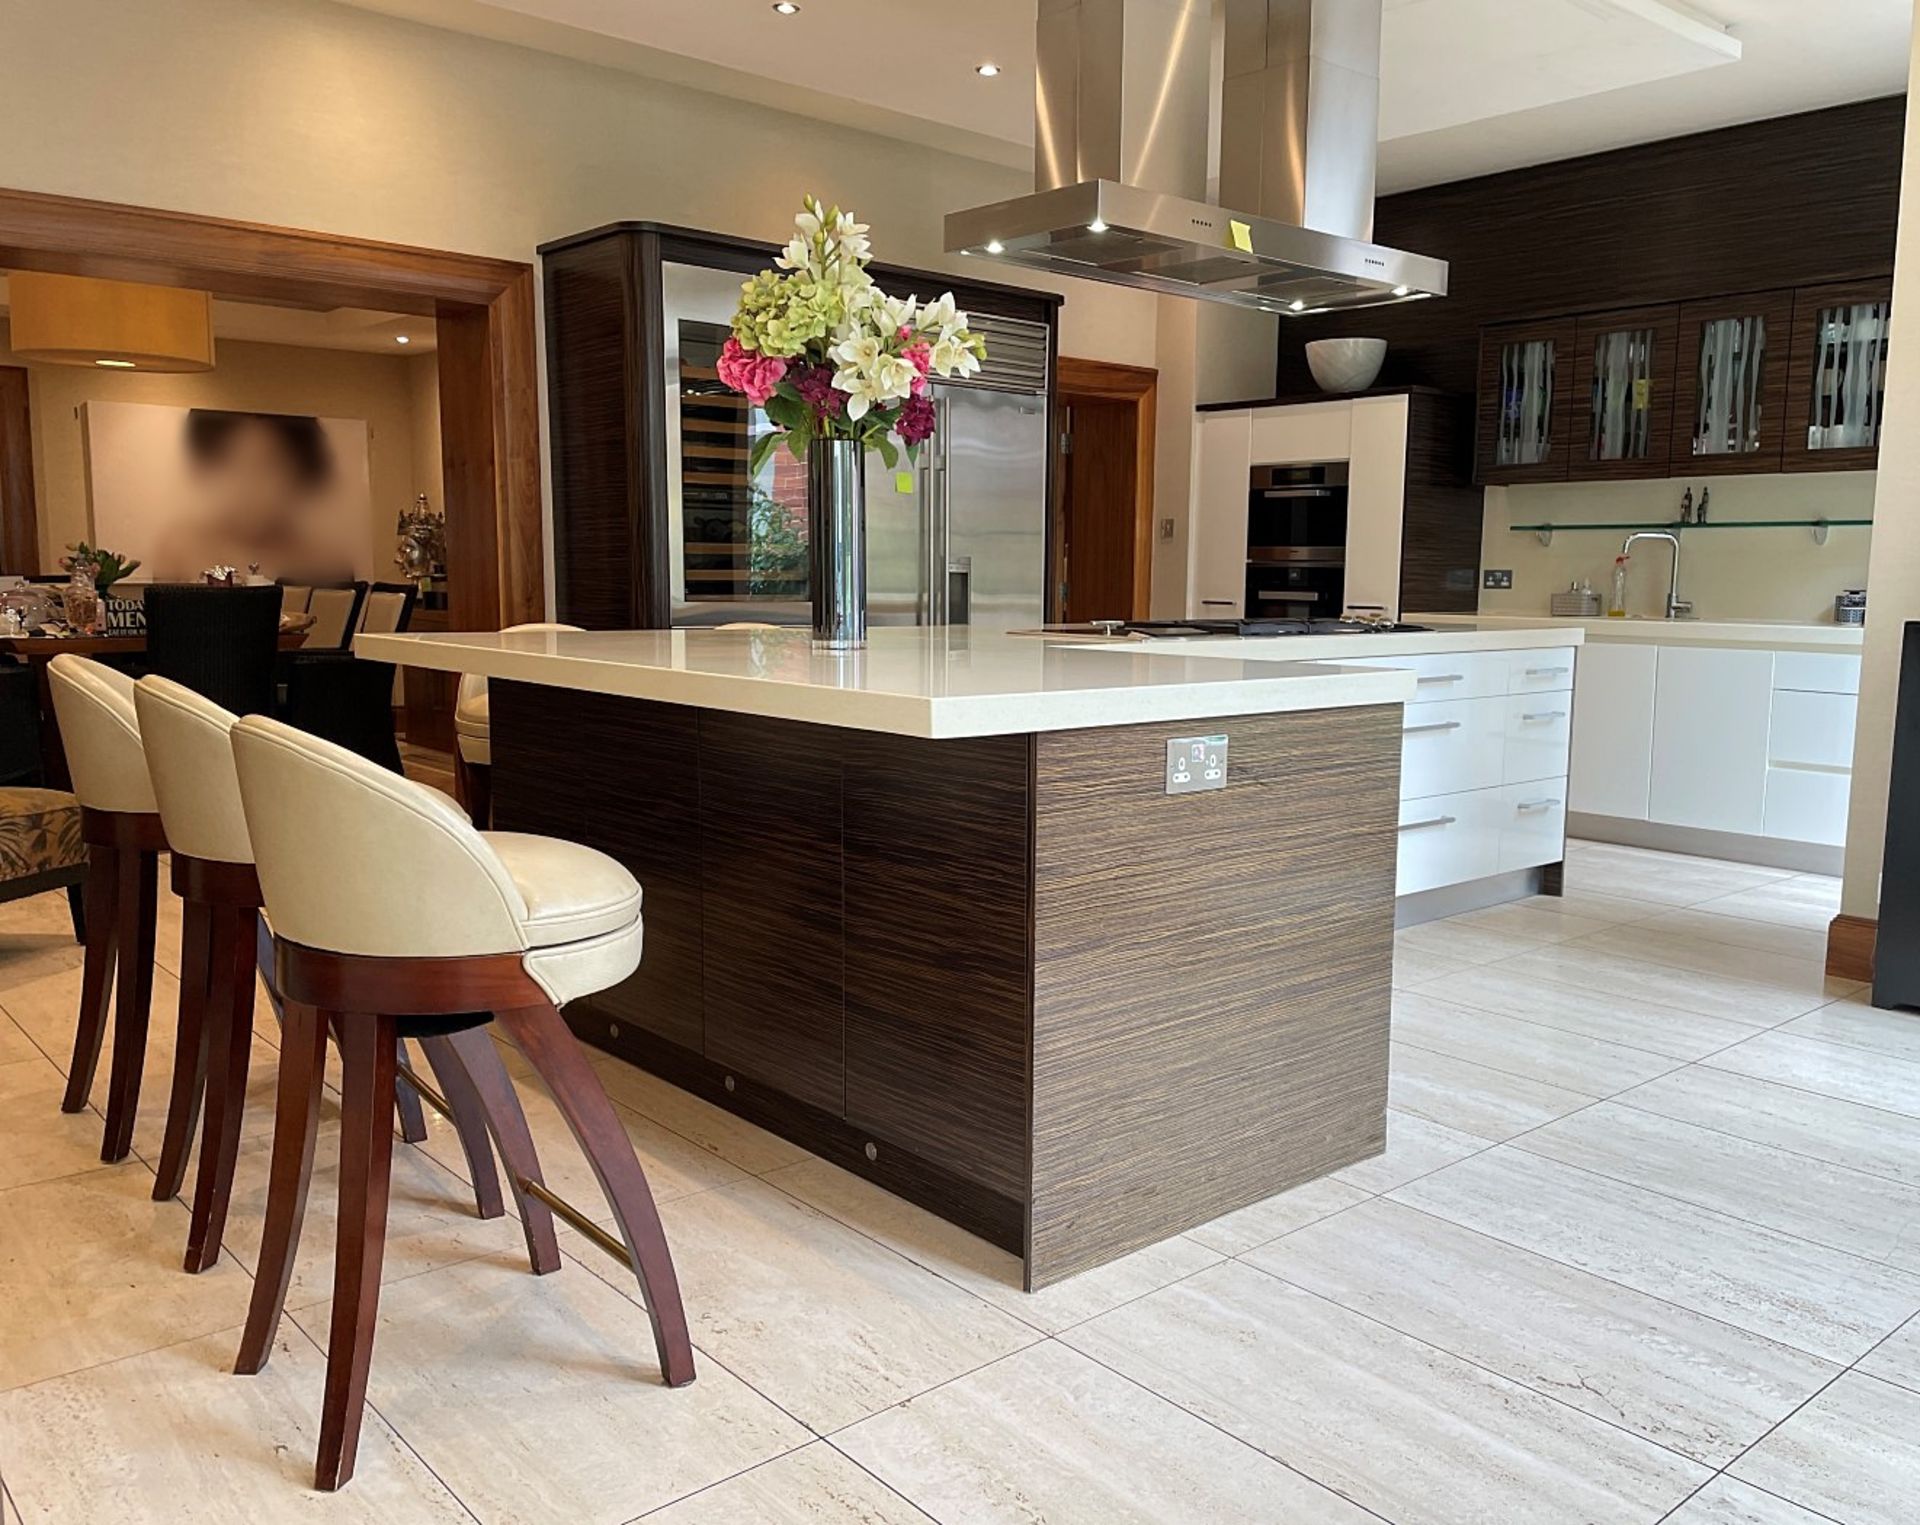 1 x Bespoke Fitted Mowlem & Co Kitchen With Miele, Wolf, and Sub Zero Appliances & Granite Worktops - Image 4 of 131